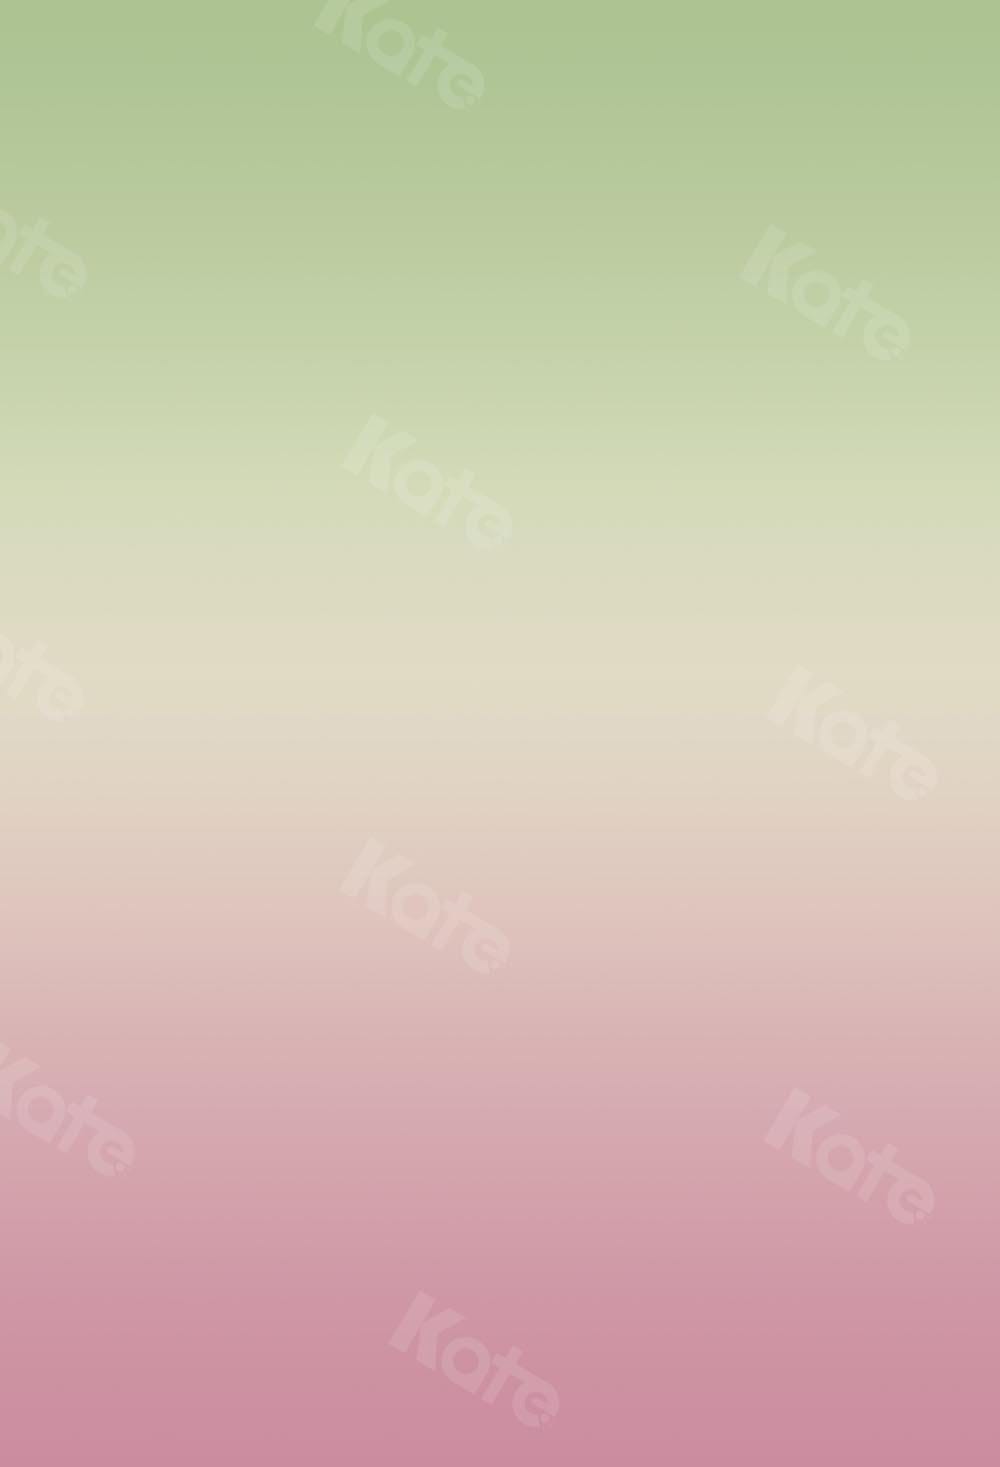 Kate Abstract Gradient Green to Pink Backdrop Designed by Kate Image